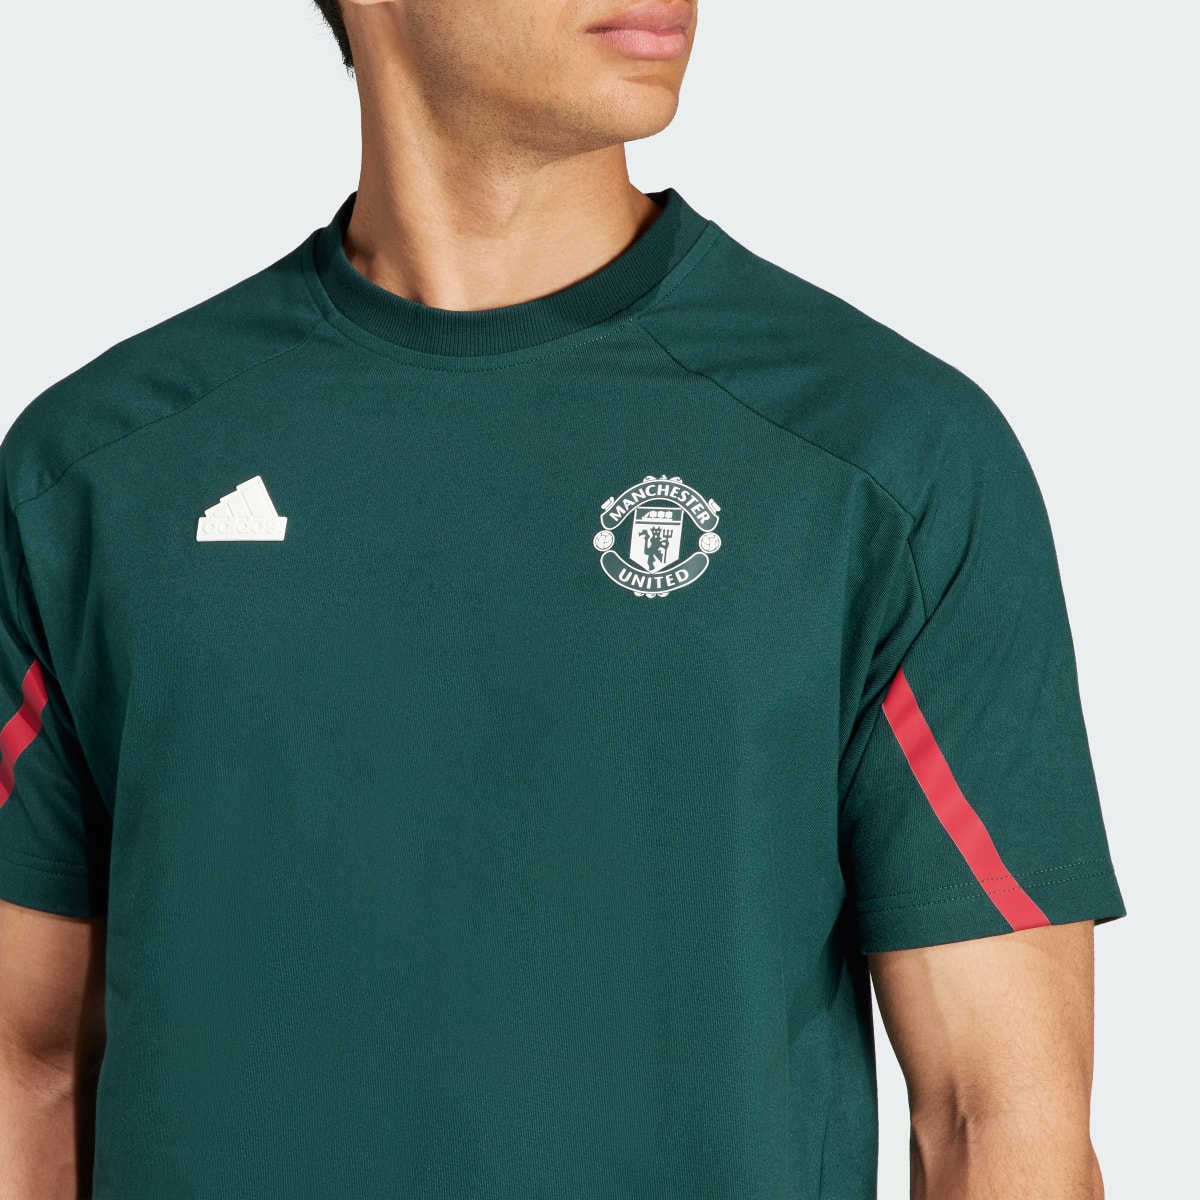 Adidas Manchester United Designed for Gameday T-Shirt. 6